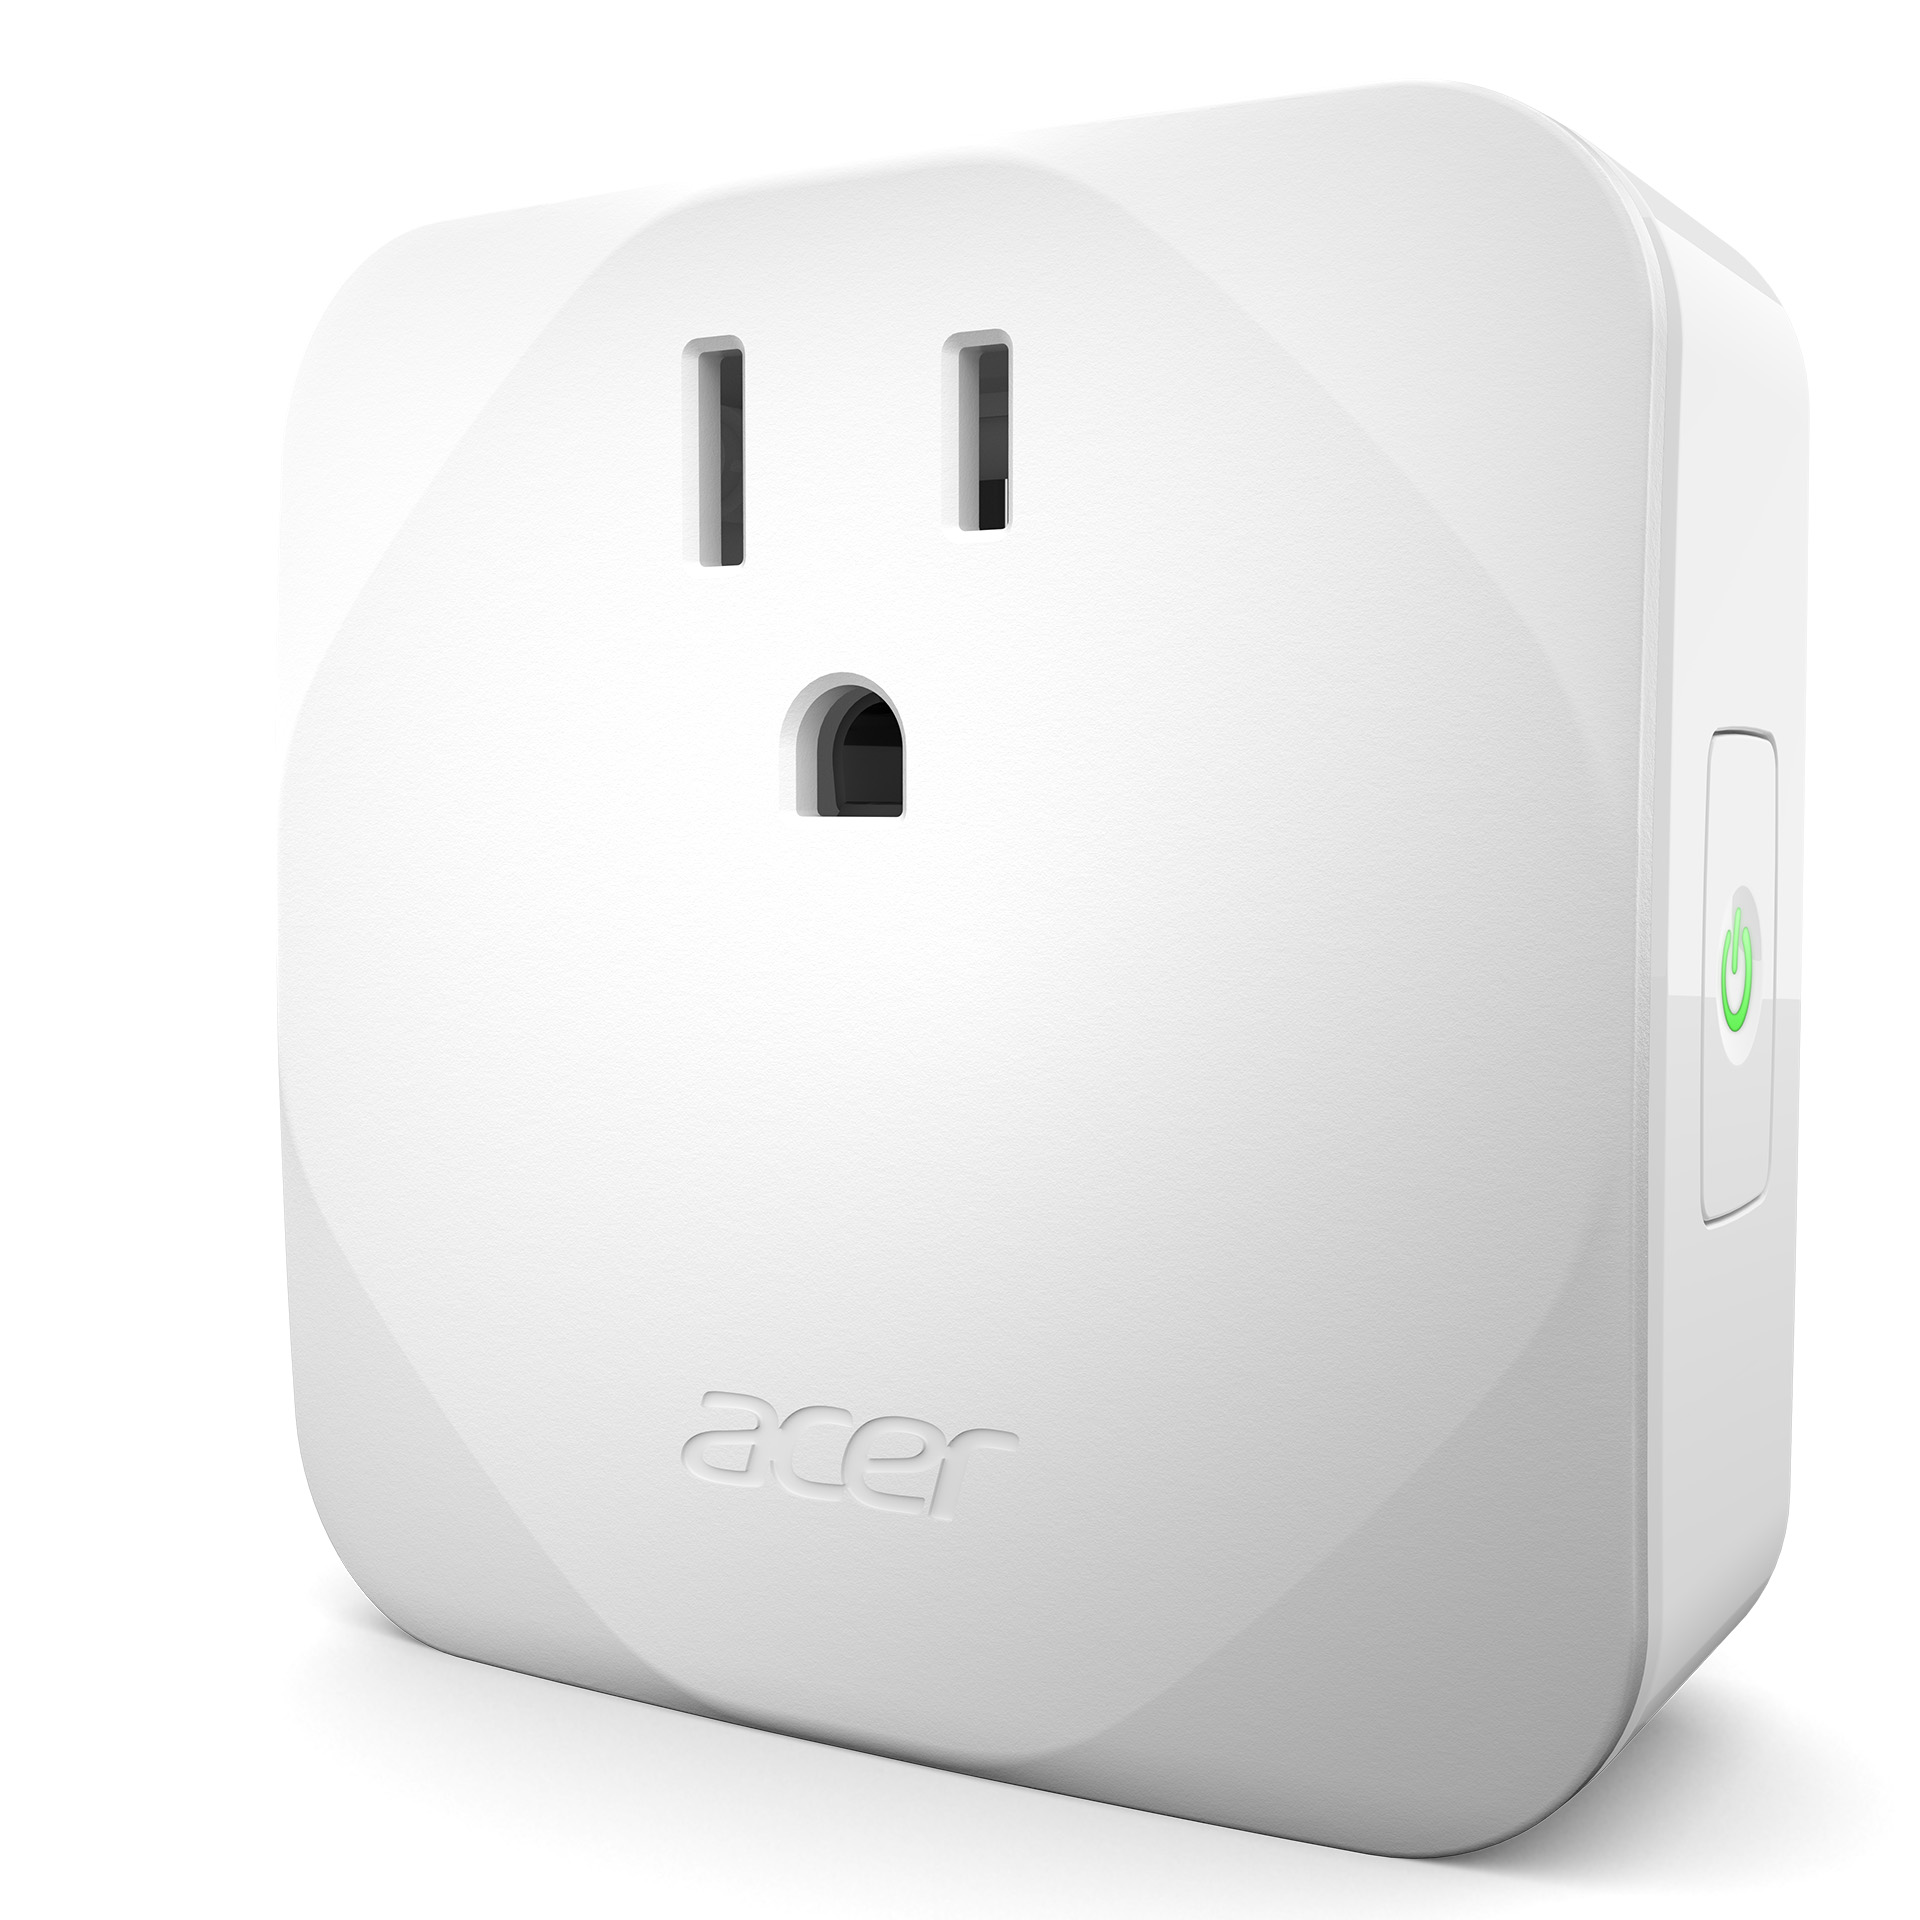 Acer Smart Plug Review: Protecting your Home